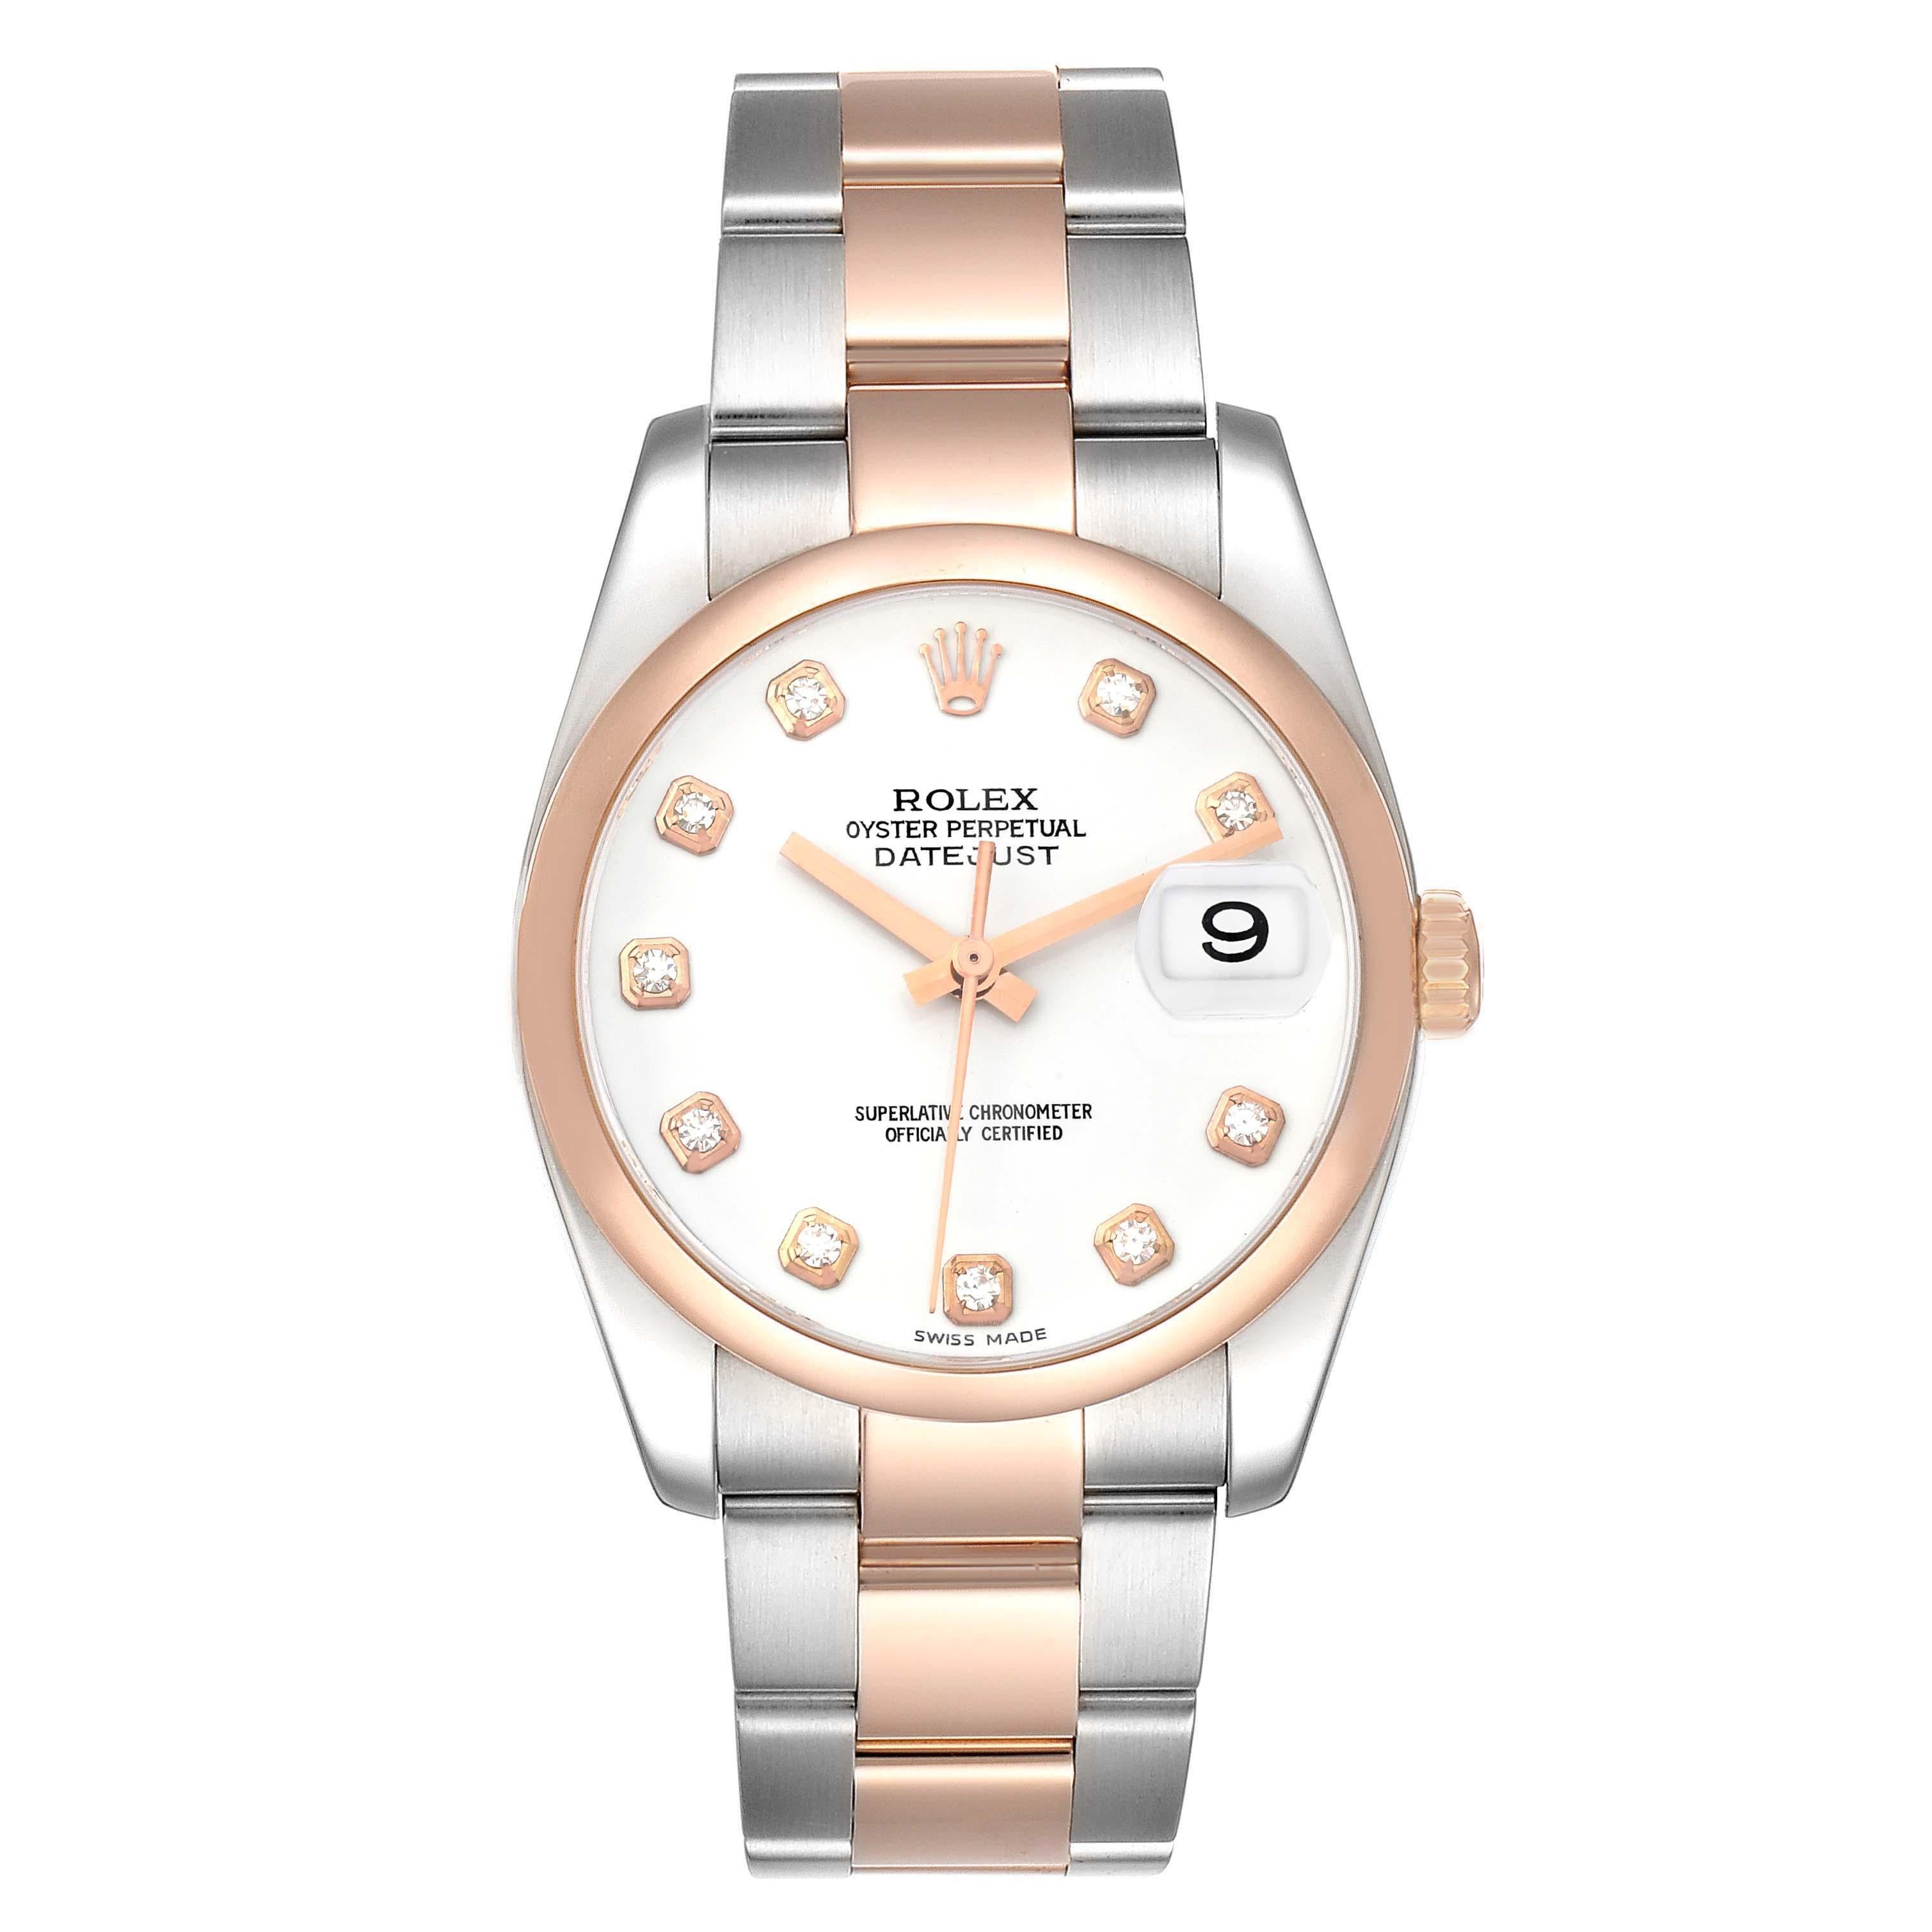 Rolex Datejust Steel Rose Gold White Diamond Dial Mens Watch 116201 Box Papers. Officially certified chronometer automatic self-winding movement with quickset date. Stainless steel case 36 mm in diameter.  Rolex logo on an 18K Everose gold crown.